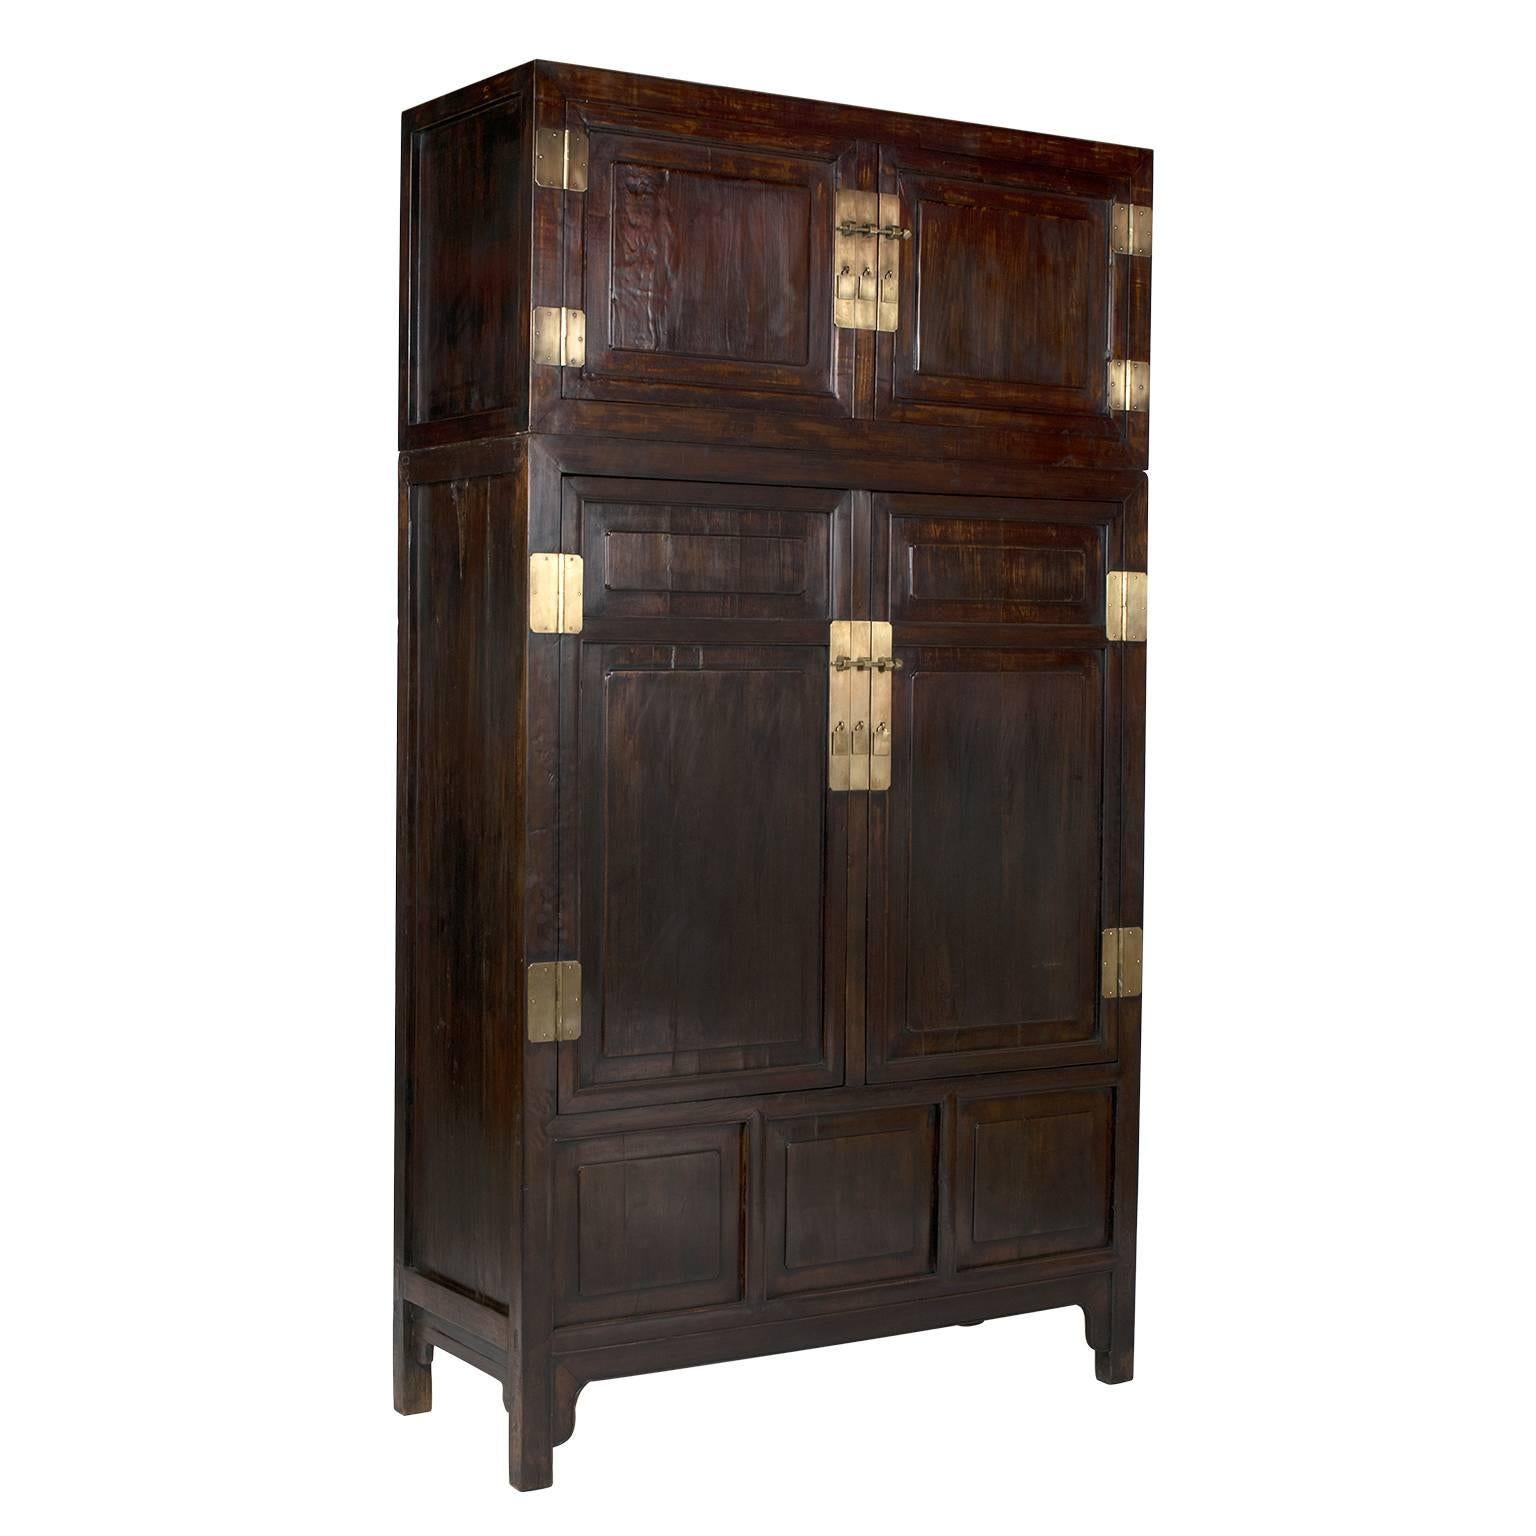 A highly skilled Chinese artisan constructed this pair of stacked compound cabinets. Each is perfectly proportioned with clean lines, carved paneled doors, hand-forged brass hardware and complex joinery. Traditional Chinese homes didn’t have closets